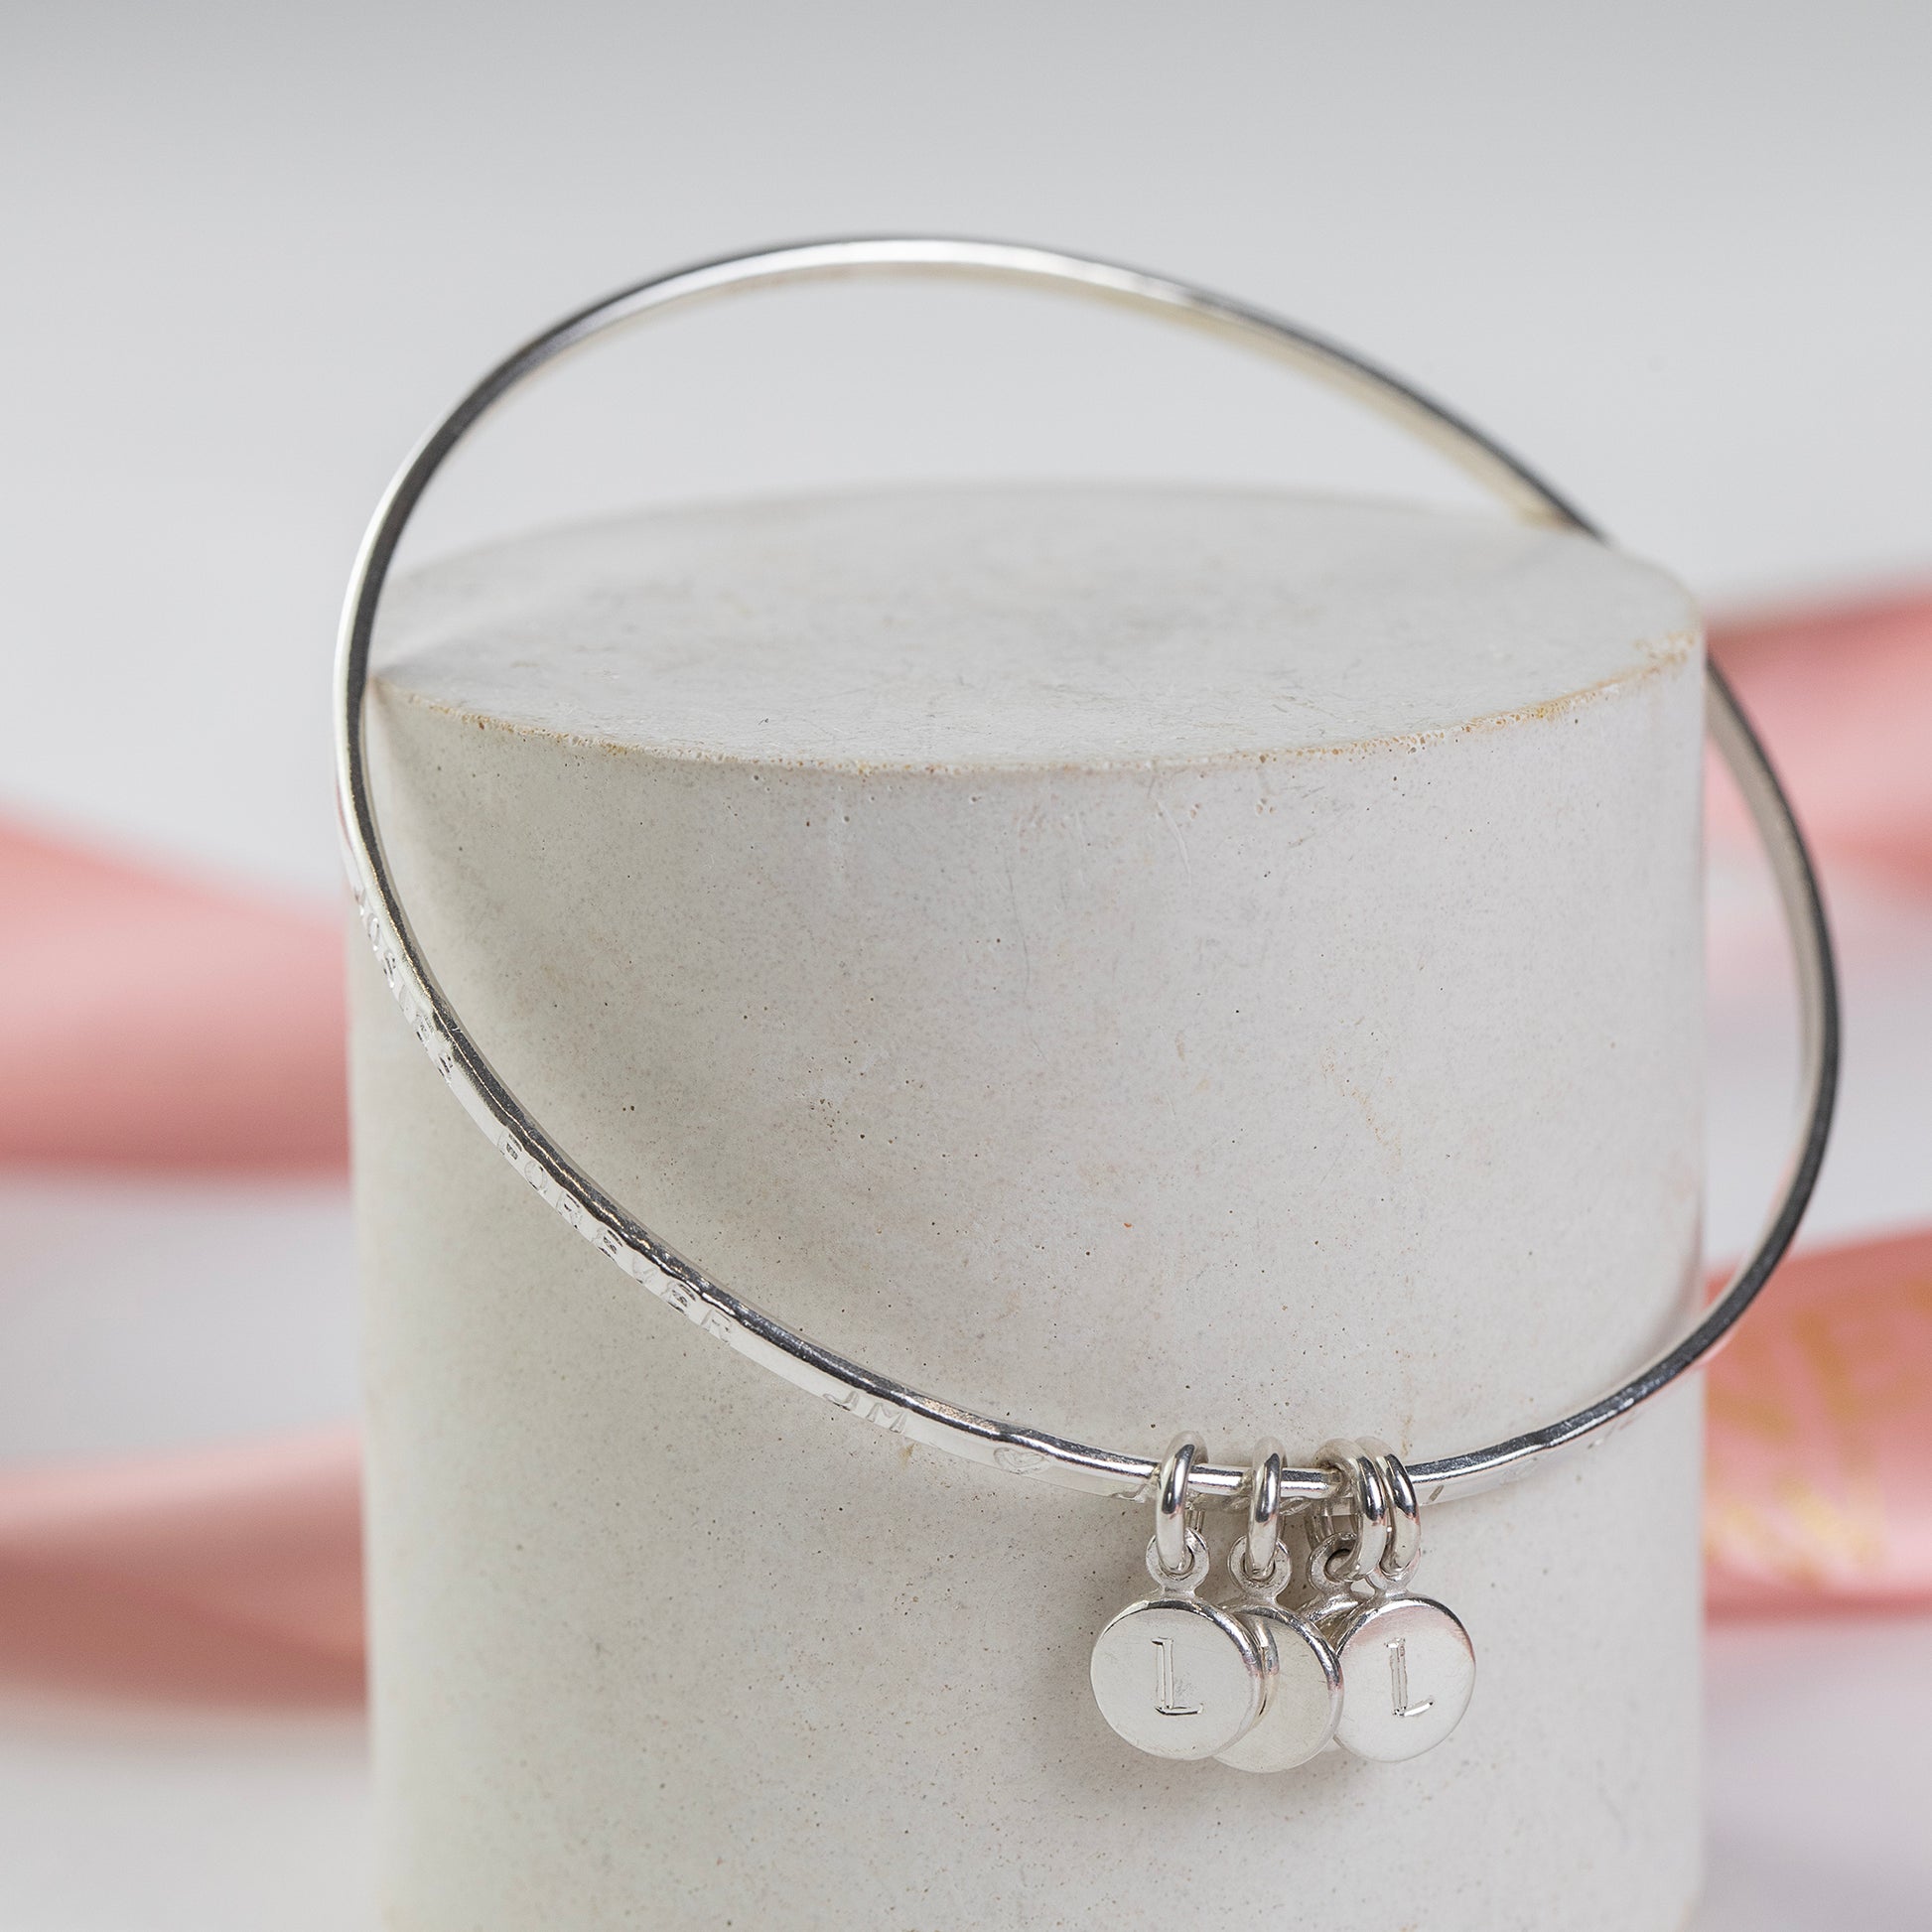 Personalised Family Initials Bangle - Silver